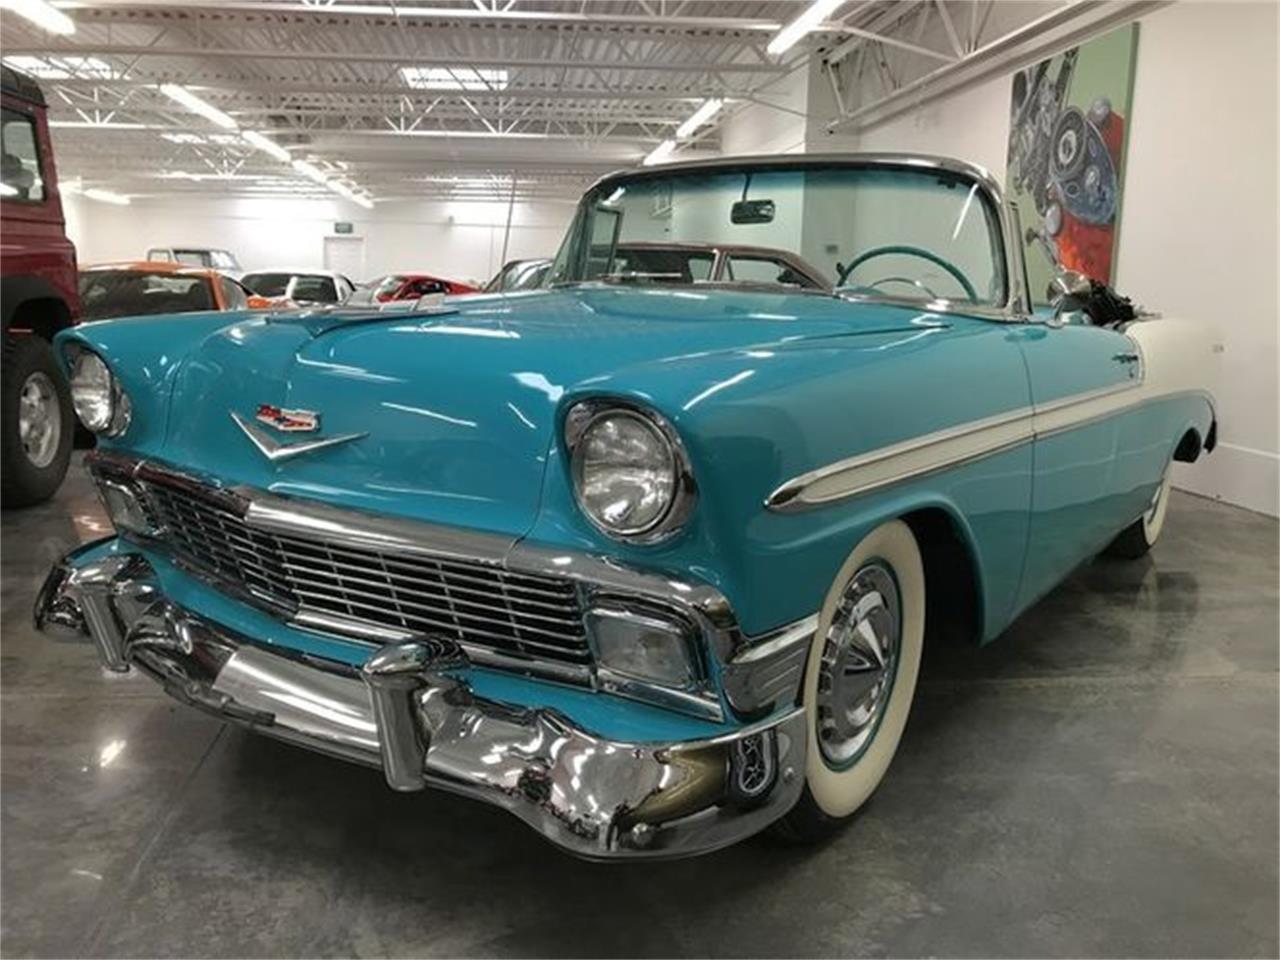 For Sale at Auction: 1956 Chevrolet Bel Air for sale in Billings, MT